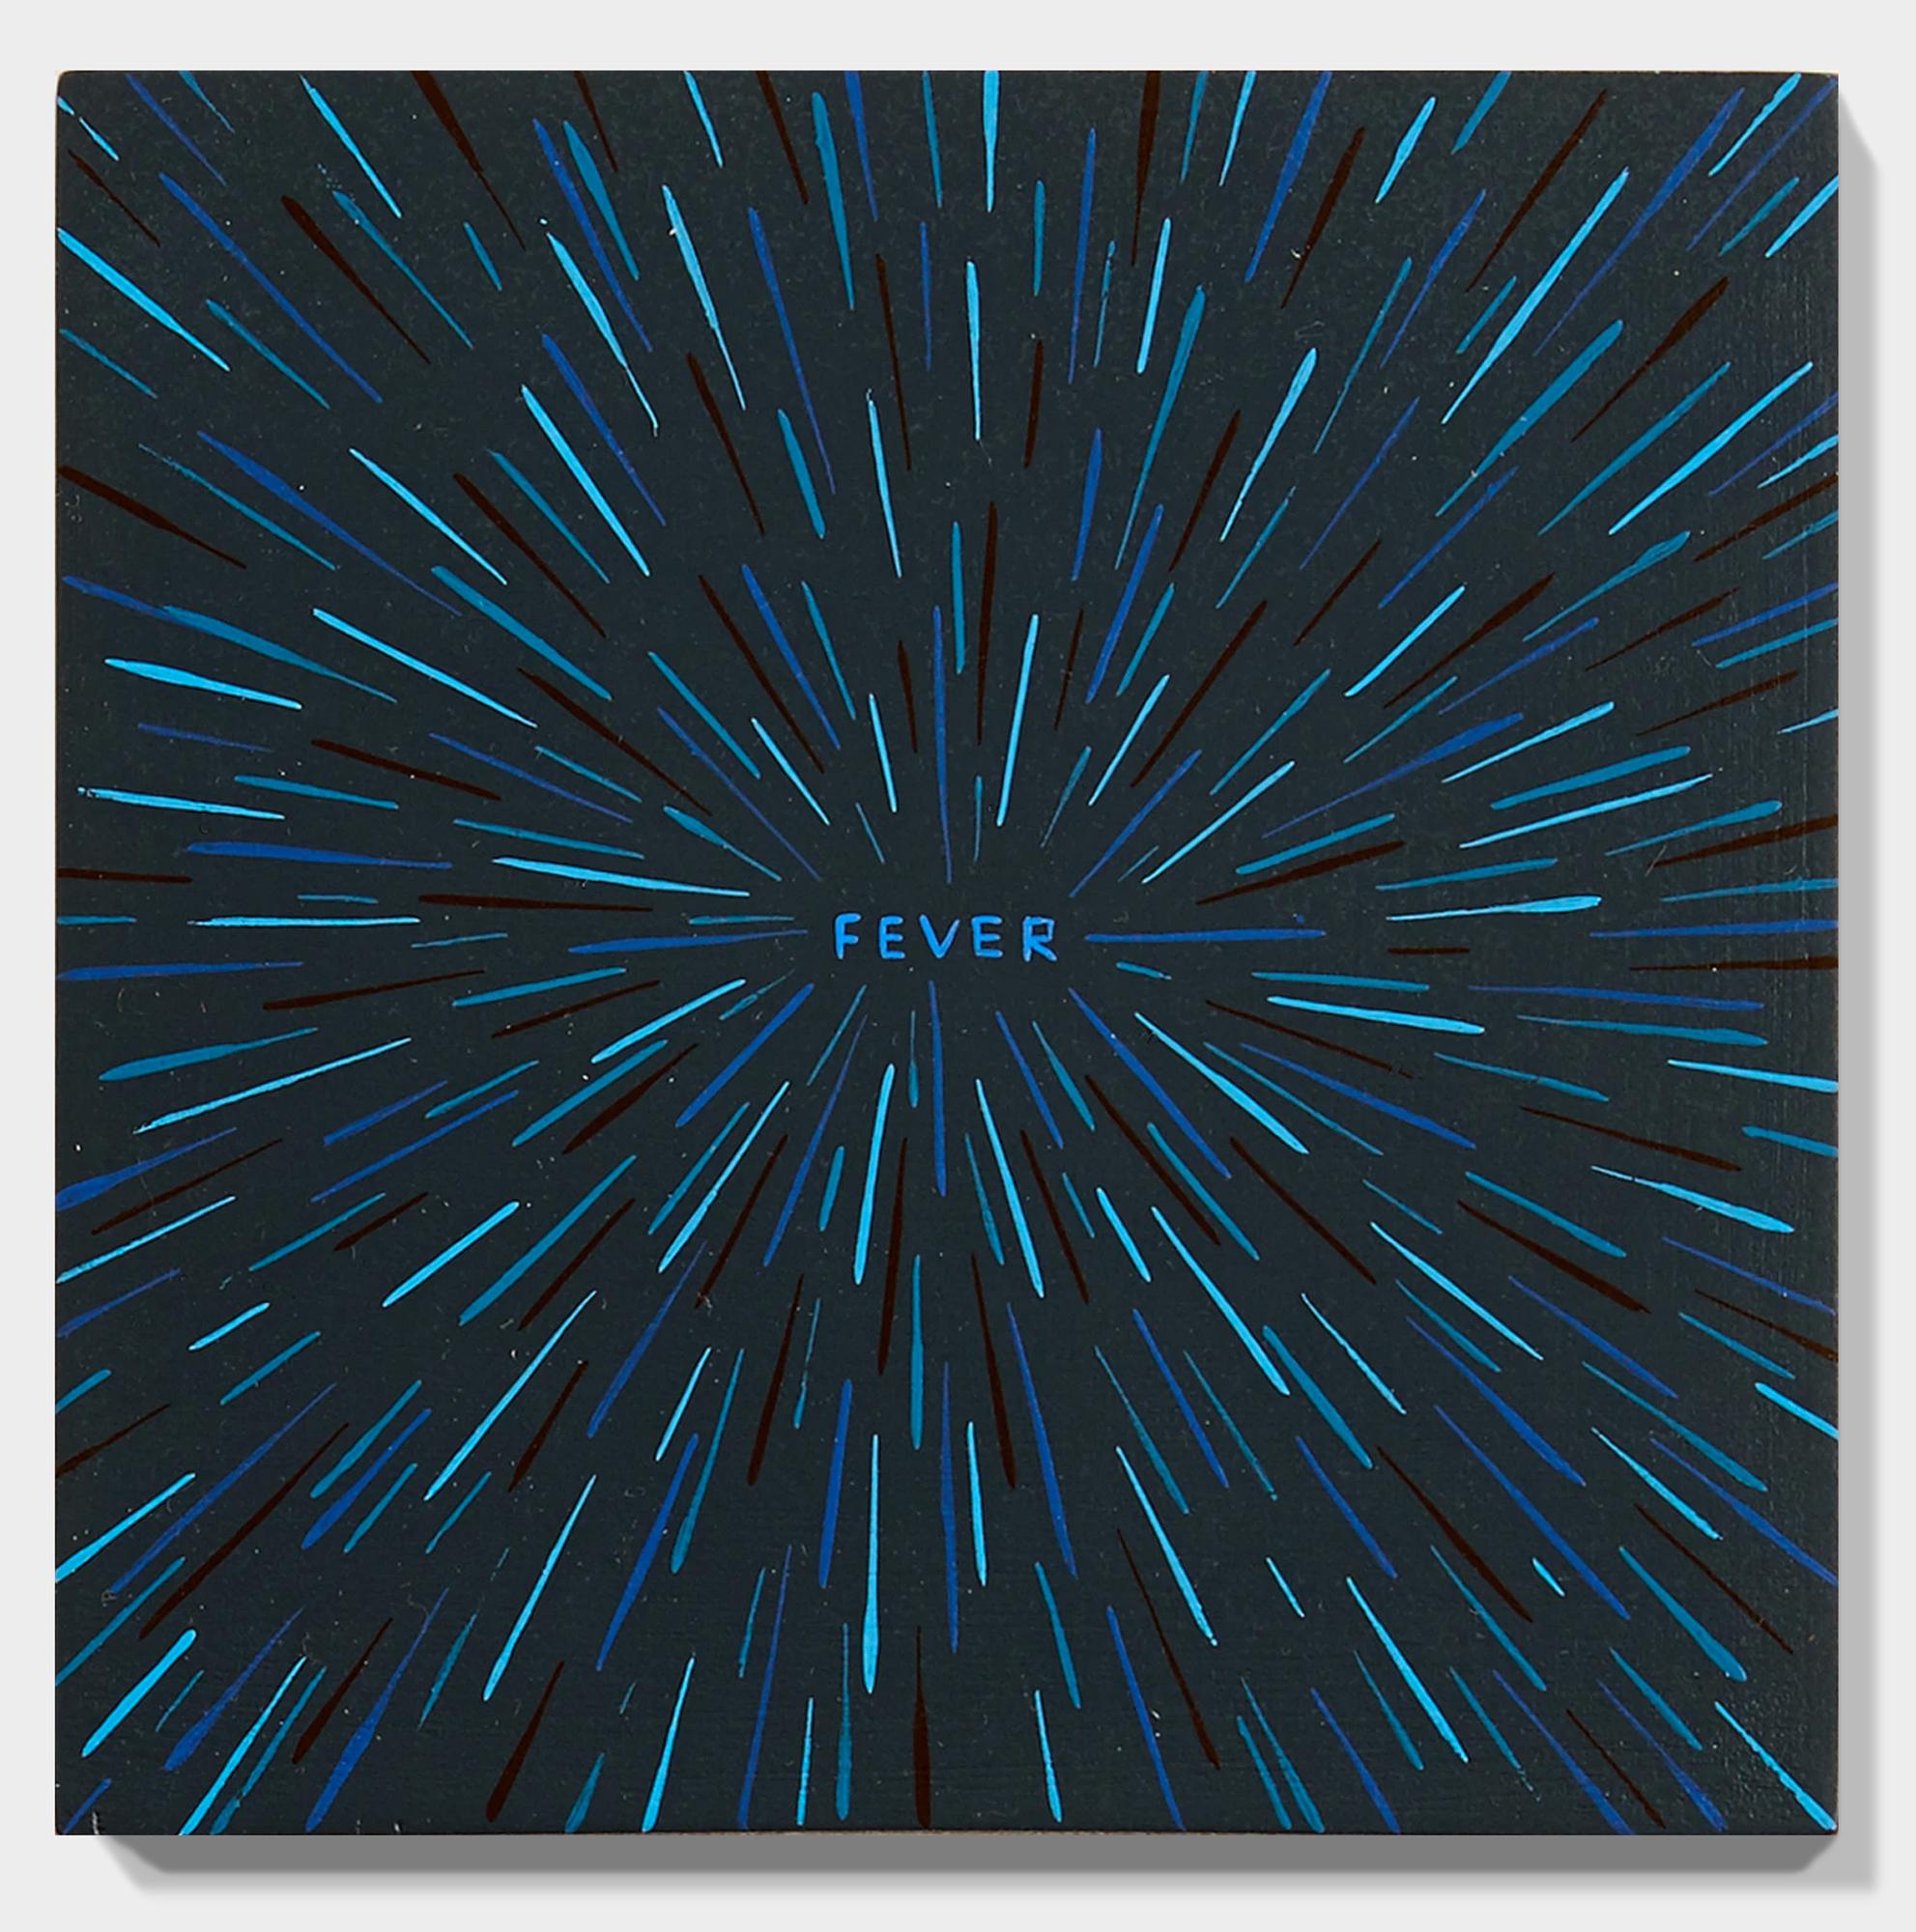 FEVER - Black Abstract Drawing by Jim Houser